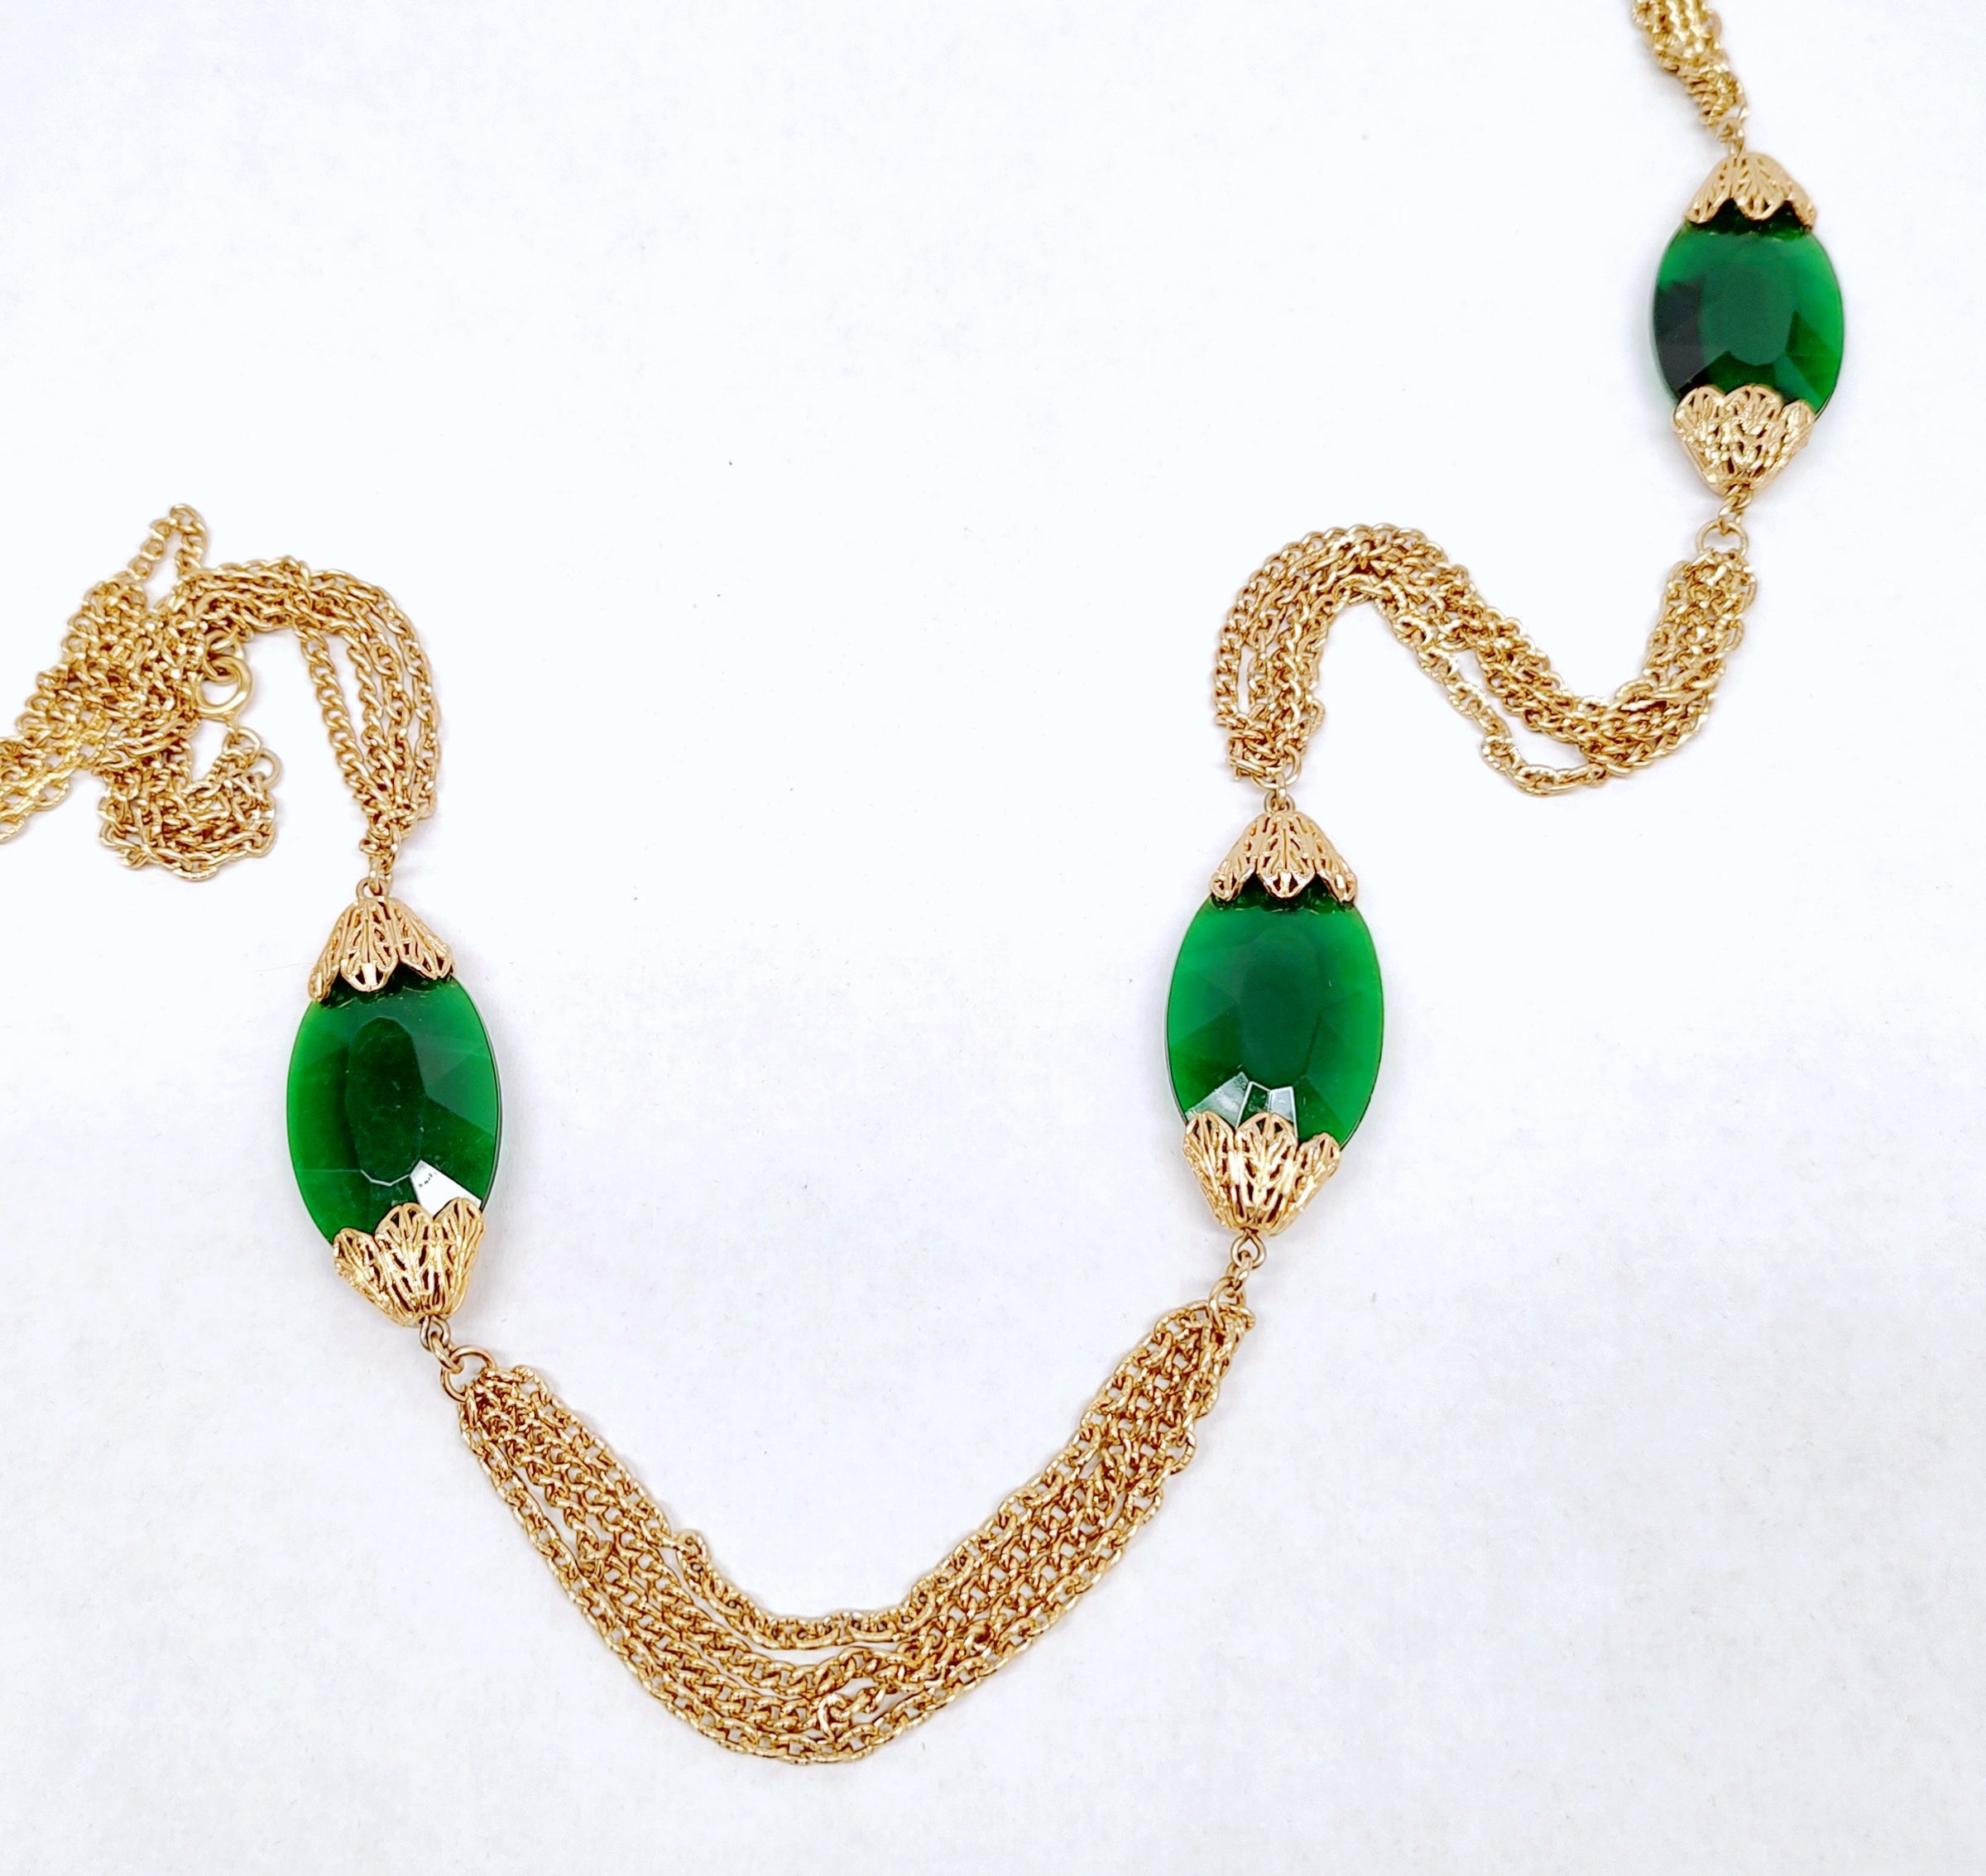 Napier Large Faceted Green Bead Multi-Strand Necklace and Earring Set - Hers and His Treasures